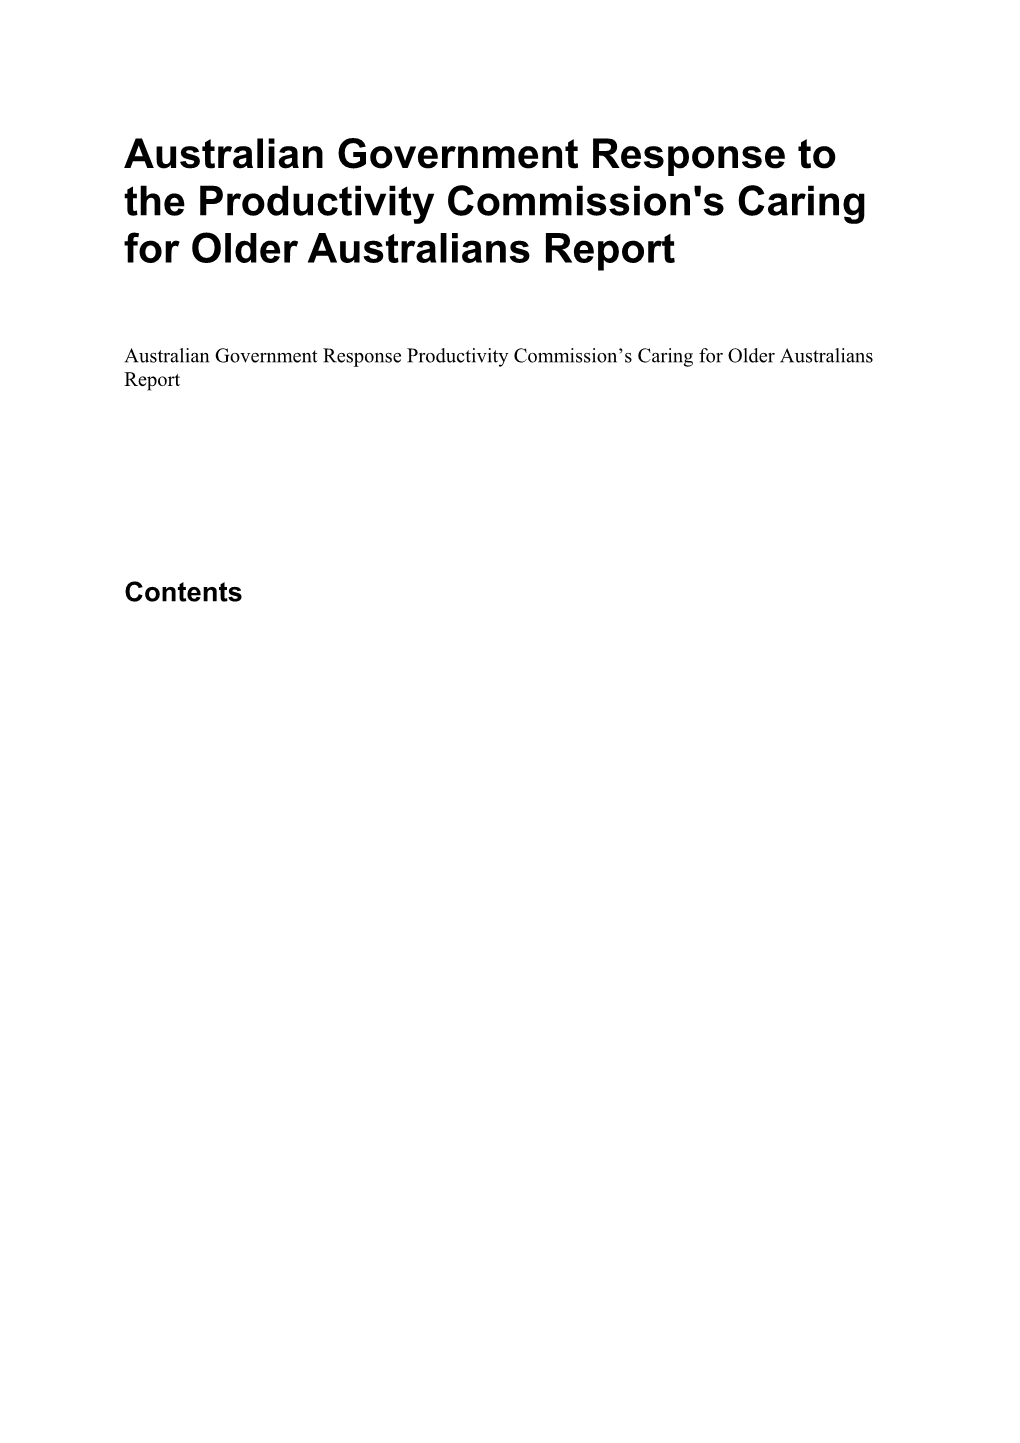 Australian Government Response to the Productivity Commission's Caring for Older Australians